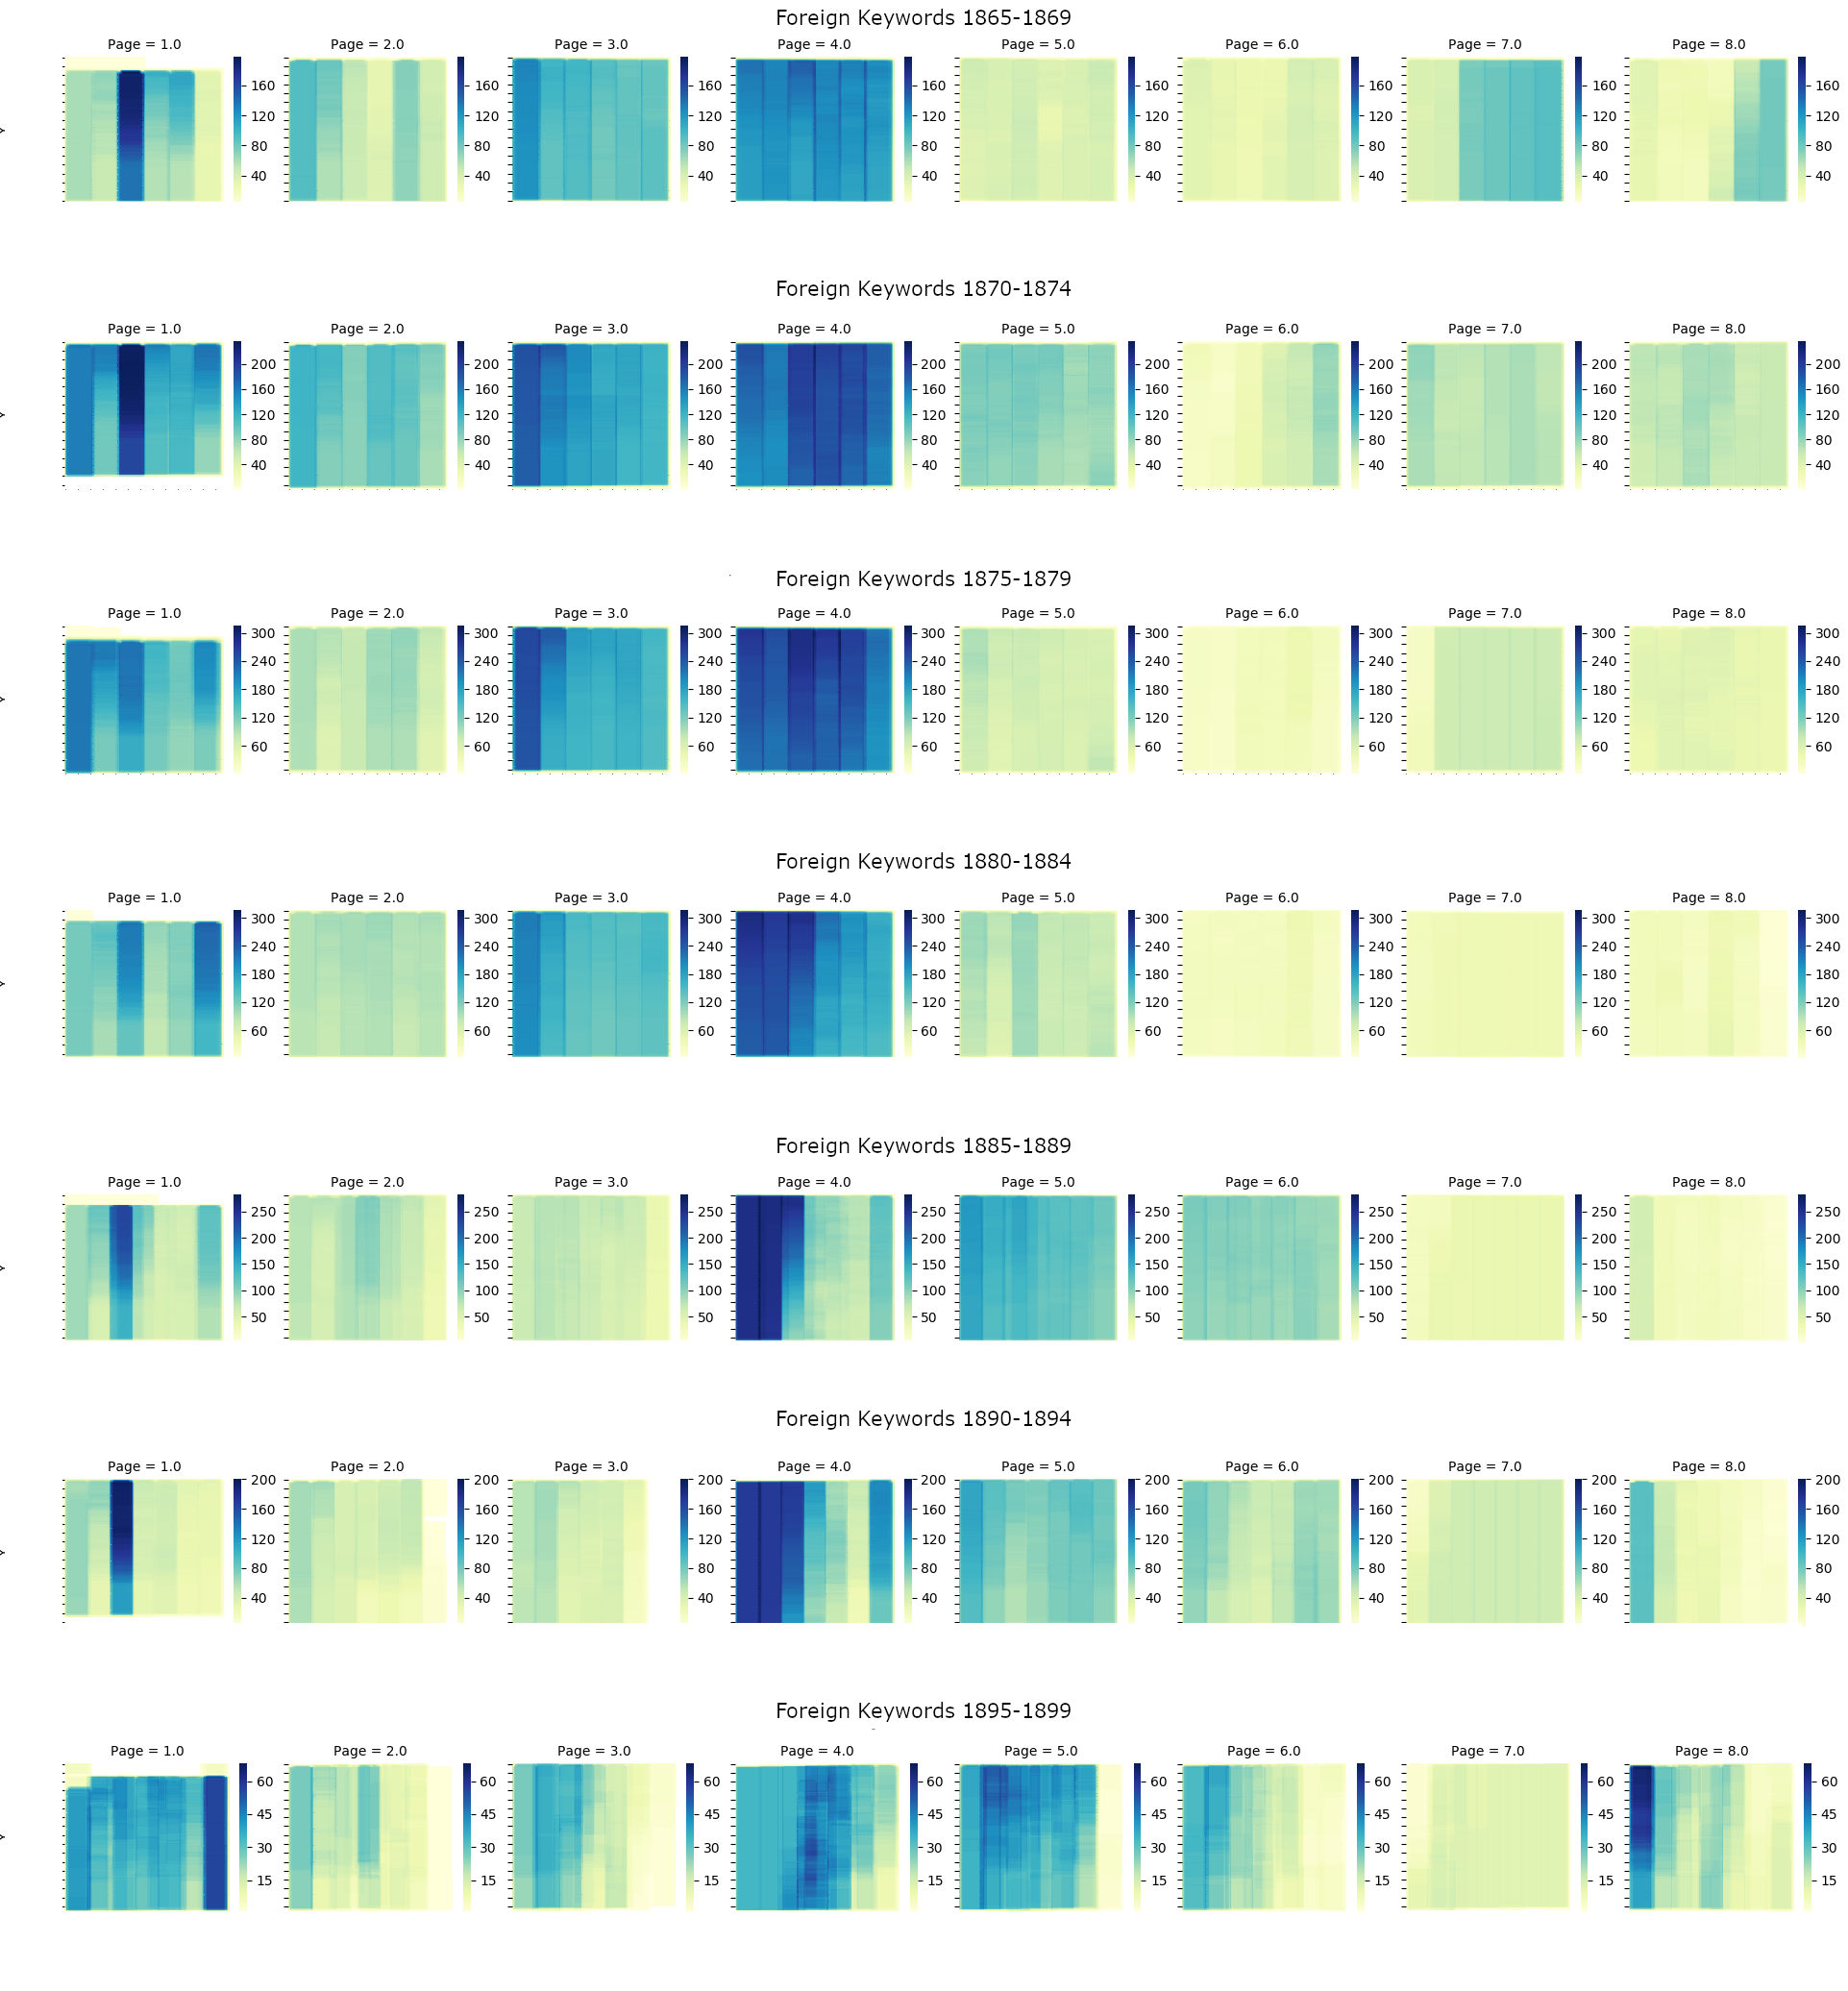 Series of heatmaps showing article placement with foreign keywords. Organized sets of five years and representing years 1865-1899.